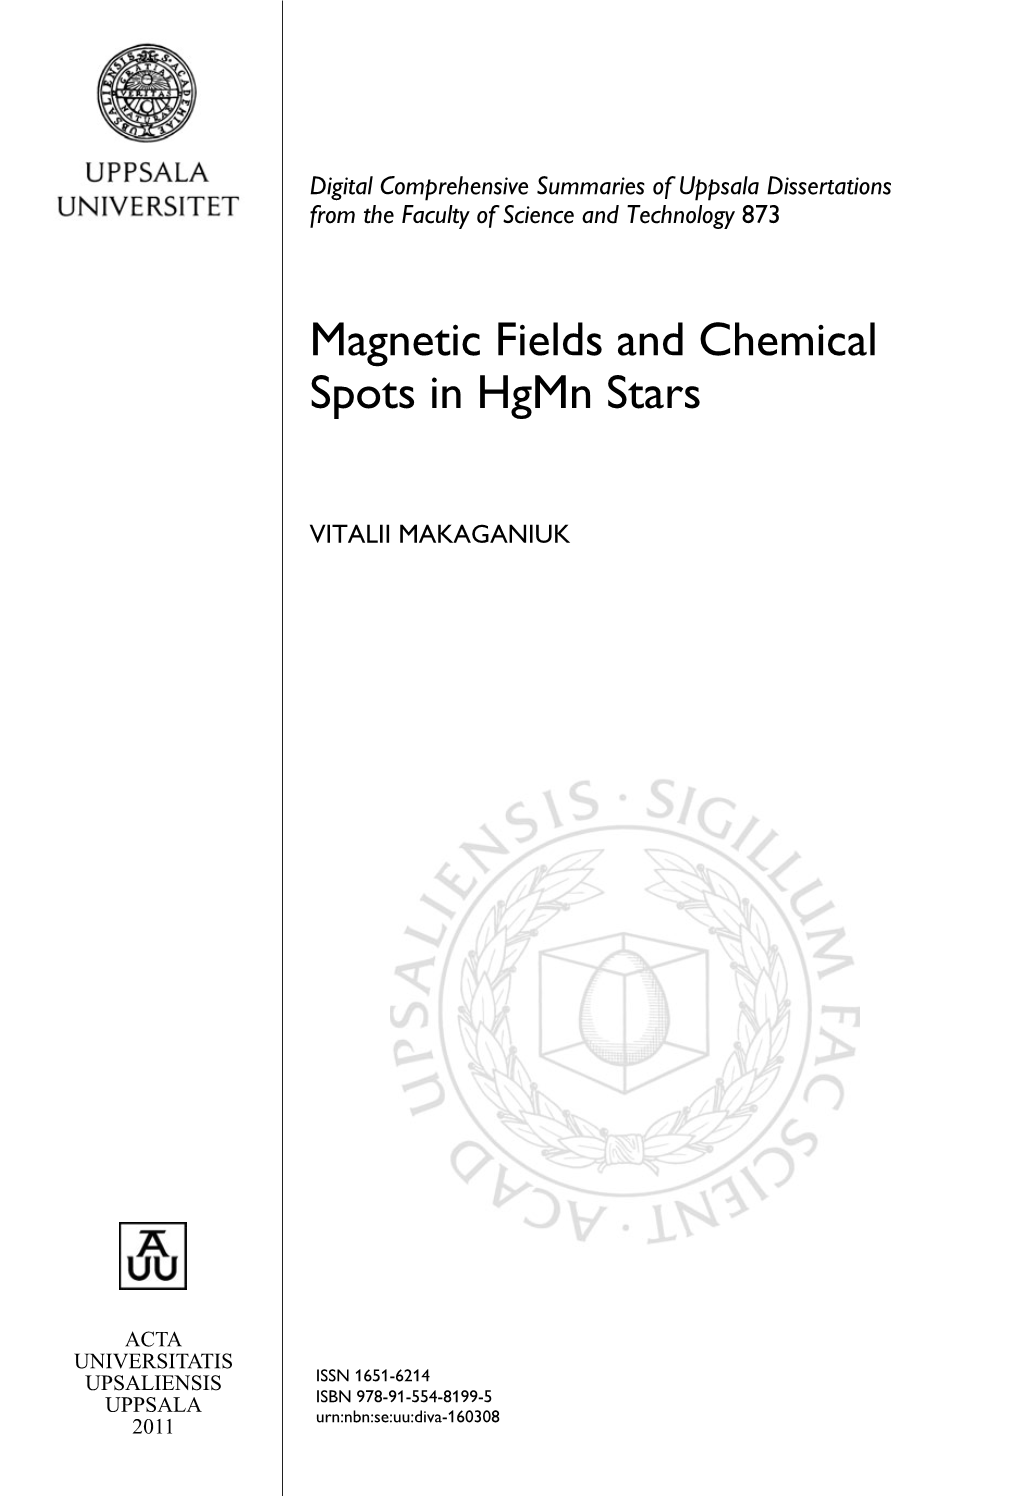 Magnetic Fields and Chemical Spots in Hgmn Stars